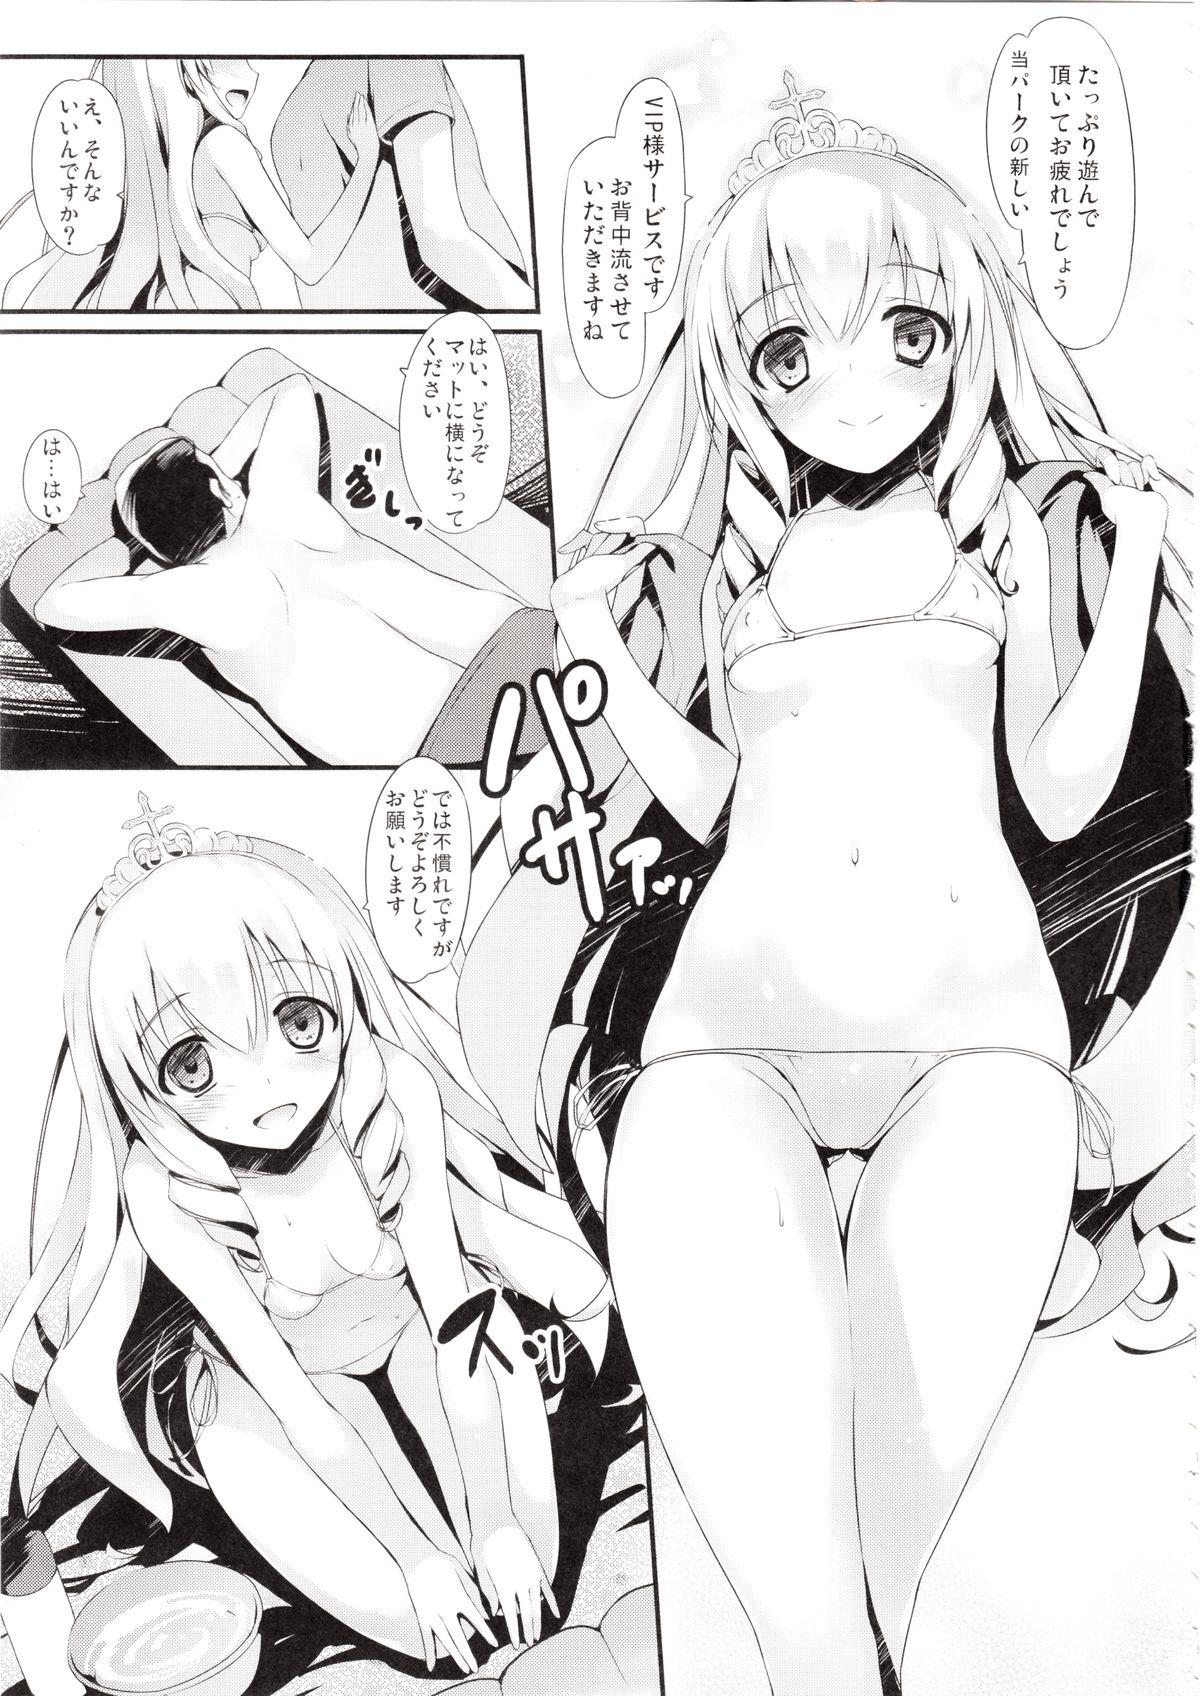 Police Wellcome to the Sex Park - Amagi brilliant park Banging - Page 5